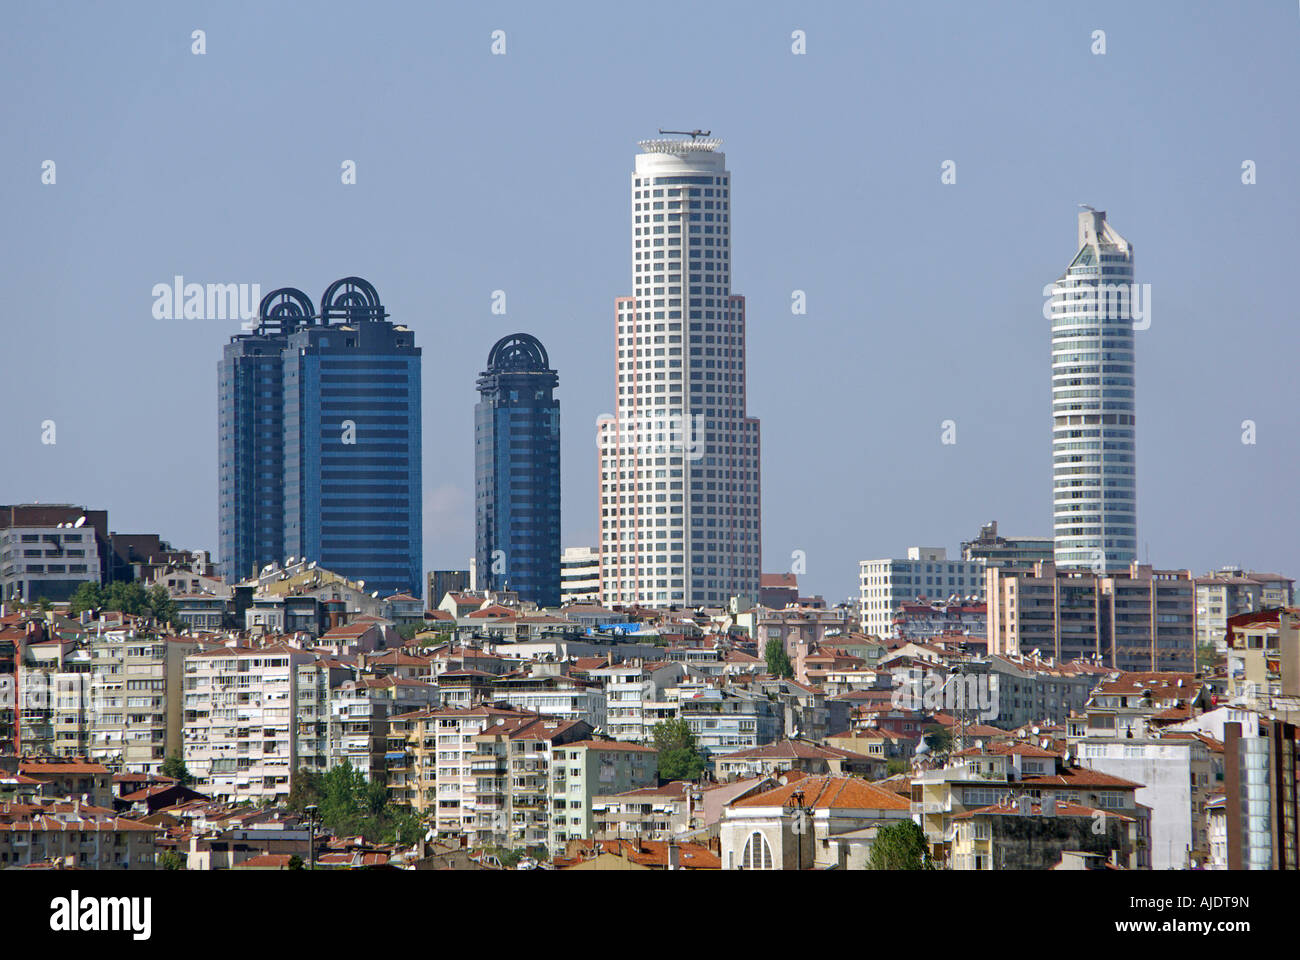 Istanbul skyline with skyscrapers on skyline as seen from the Bosphorus Stock Photo